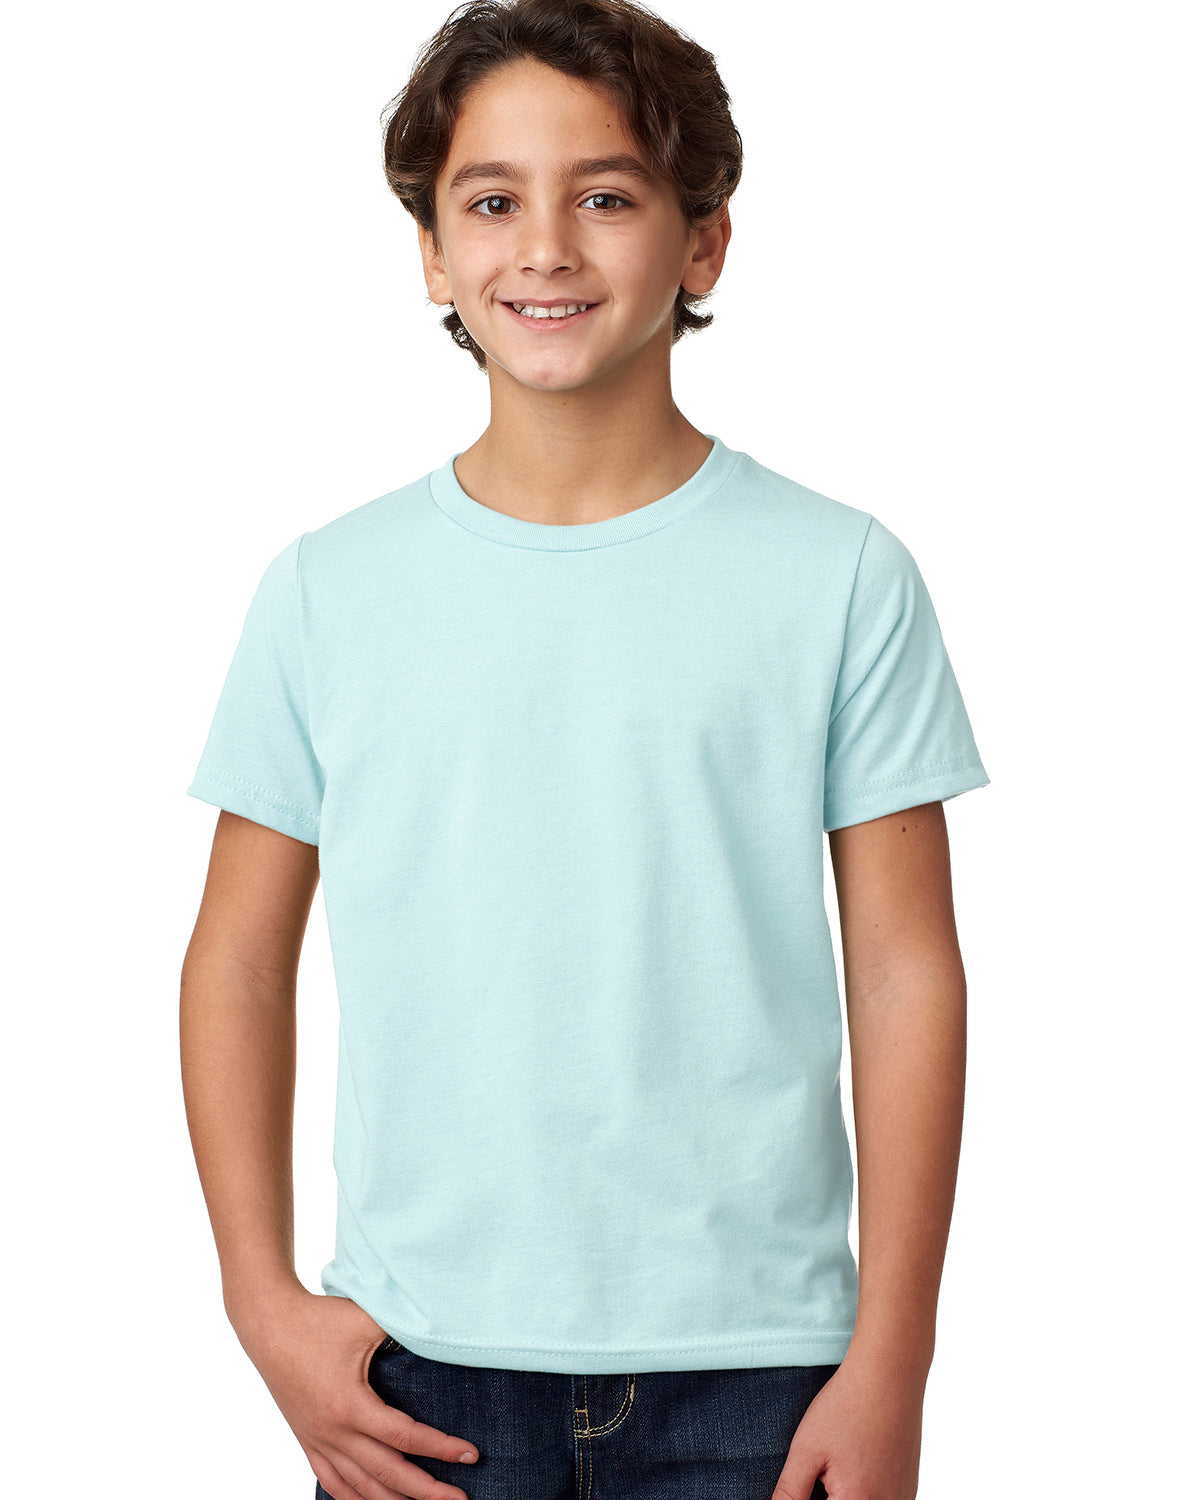 Youth Soft Cotton/Poly Blend T-Shirt Next Level 3312 – New 